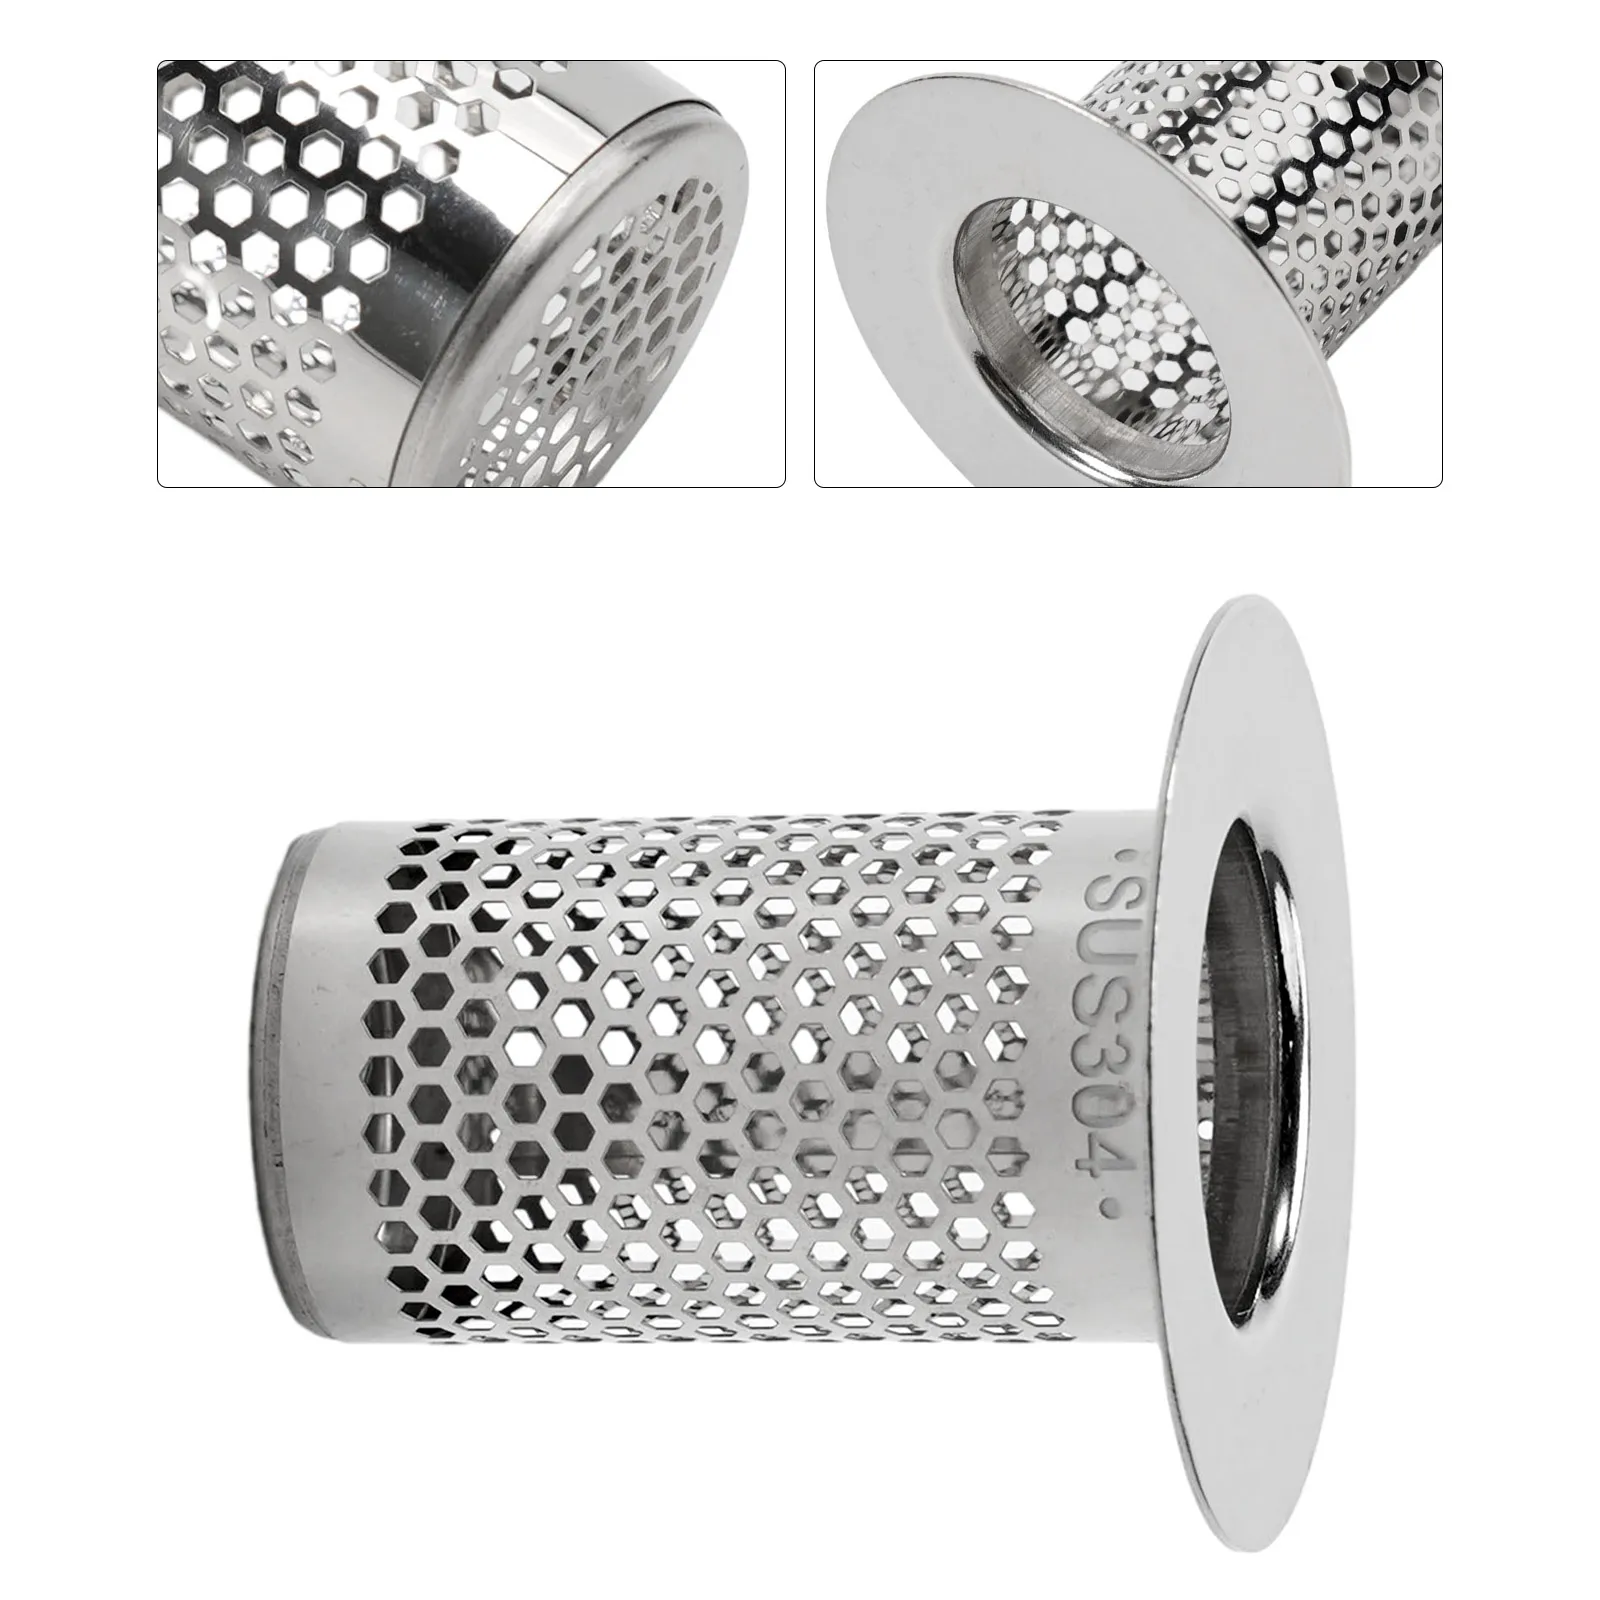 Brand New Drain Strainer Sink Filter Hair Catcher Kitchen Replacement Rust Resistant Stainless Steel Stopper Basket Waste Plug stainless steel kitchen sink filter hole bathtub hair catcher stopper bathroom sewer drain strainer basin sink waste filter plug